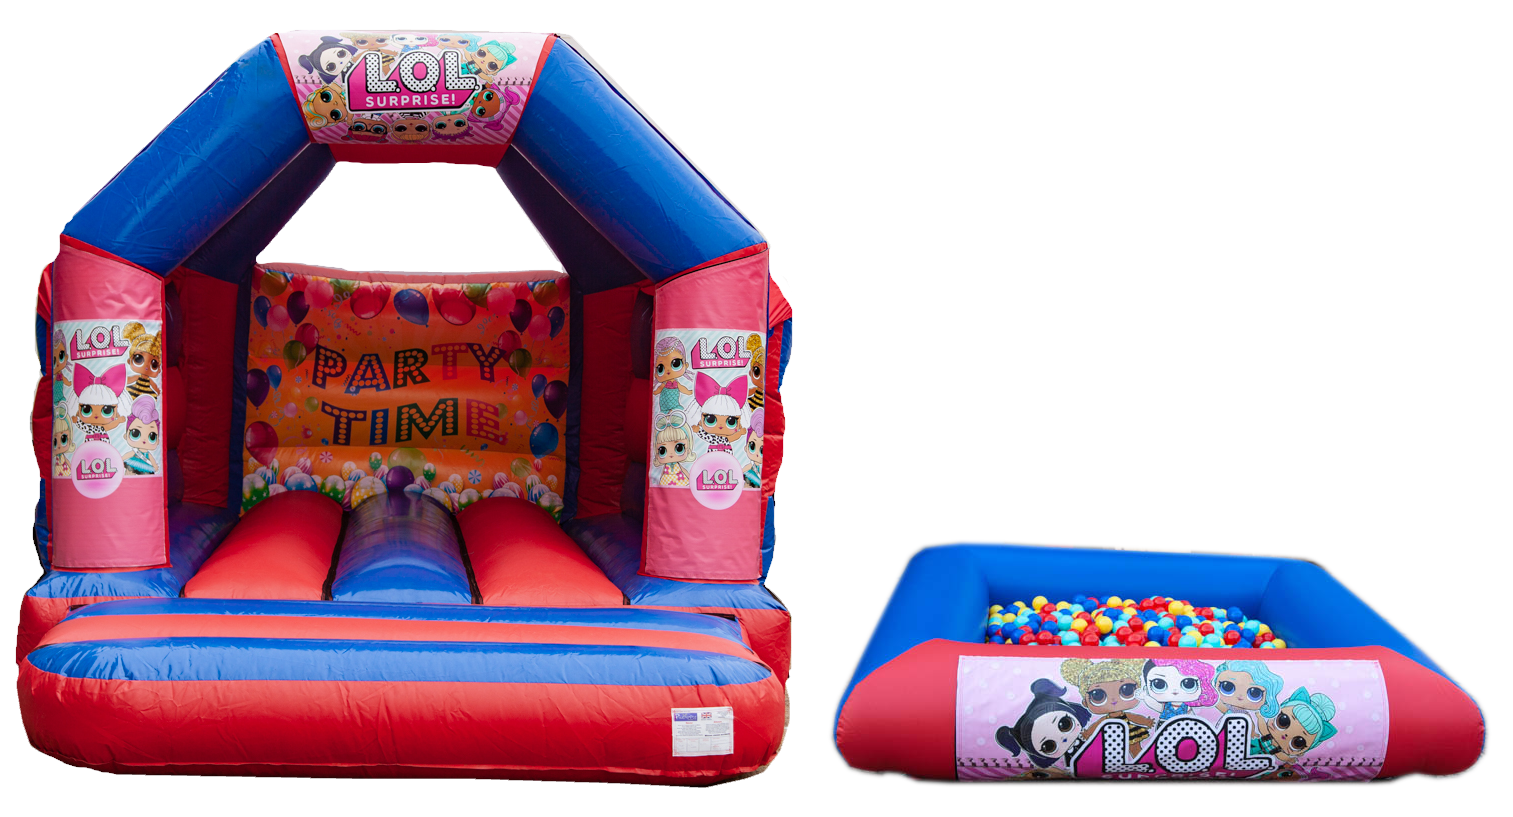 Red & Blue Bouncy castle and ball pool package for hire in Pirton